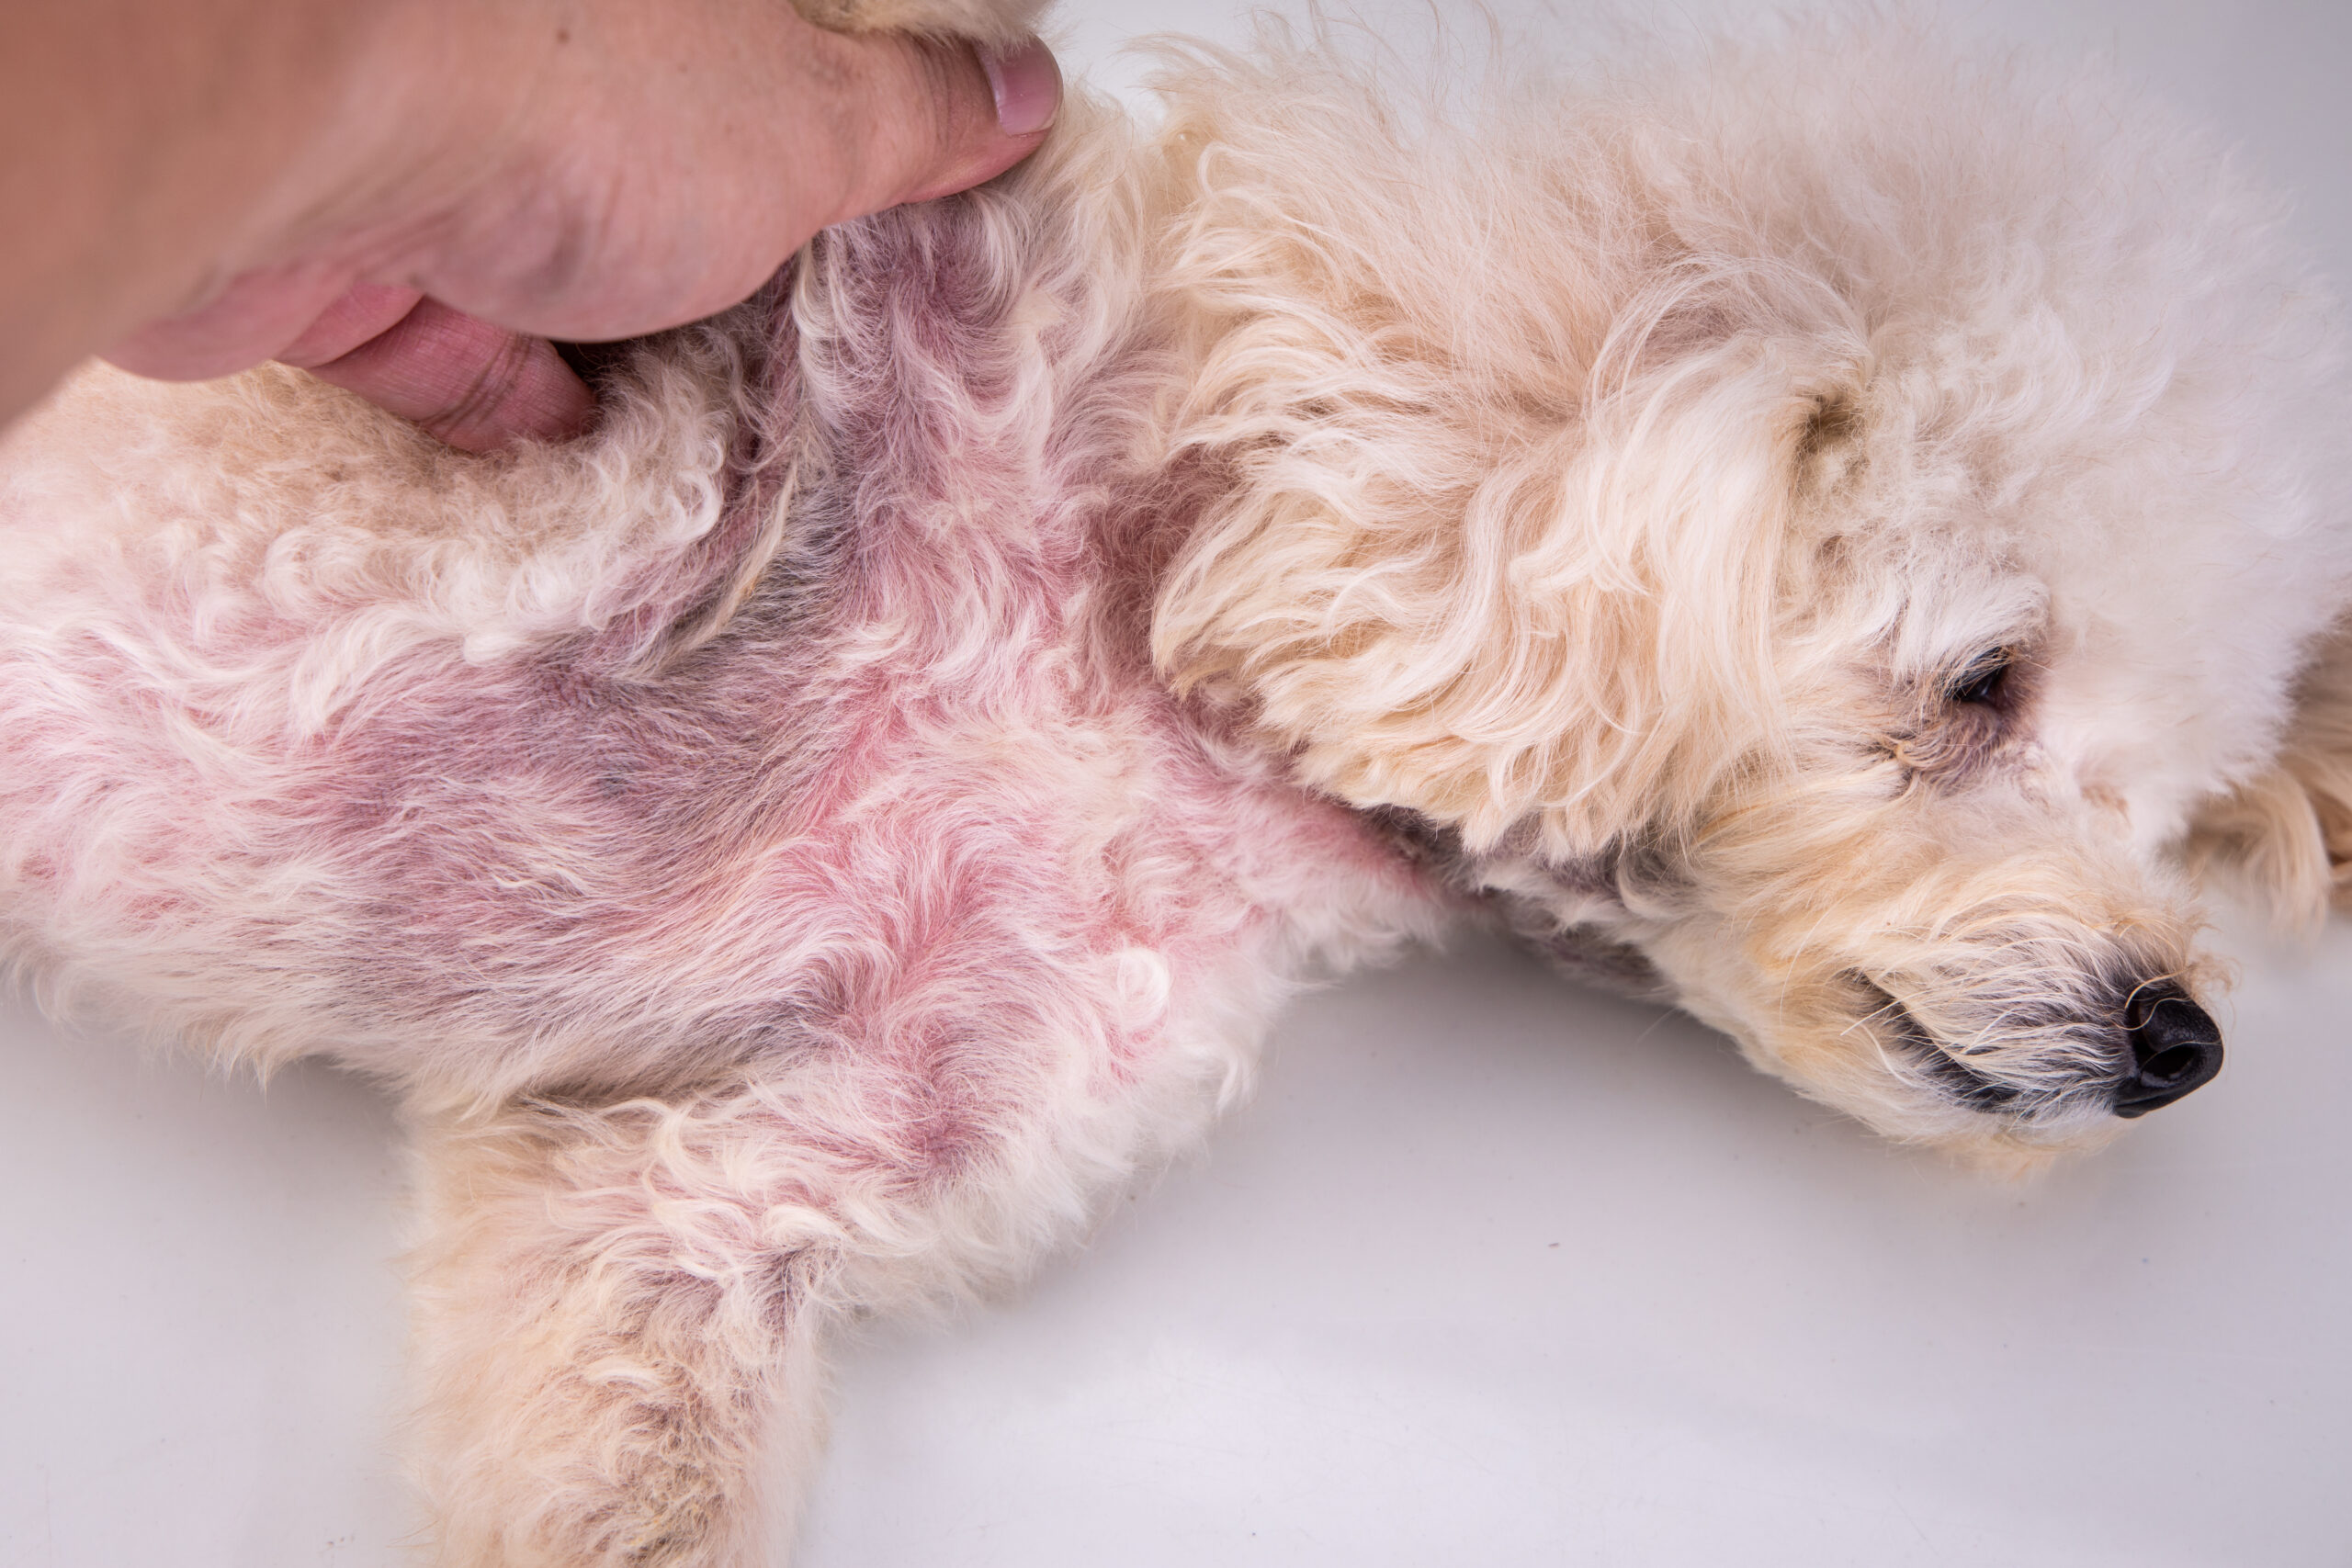 Pyoderma Dogs